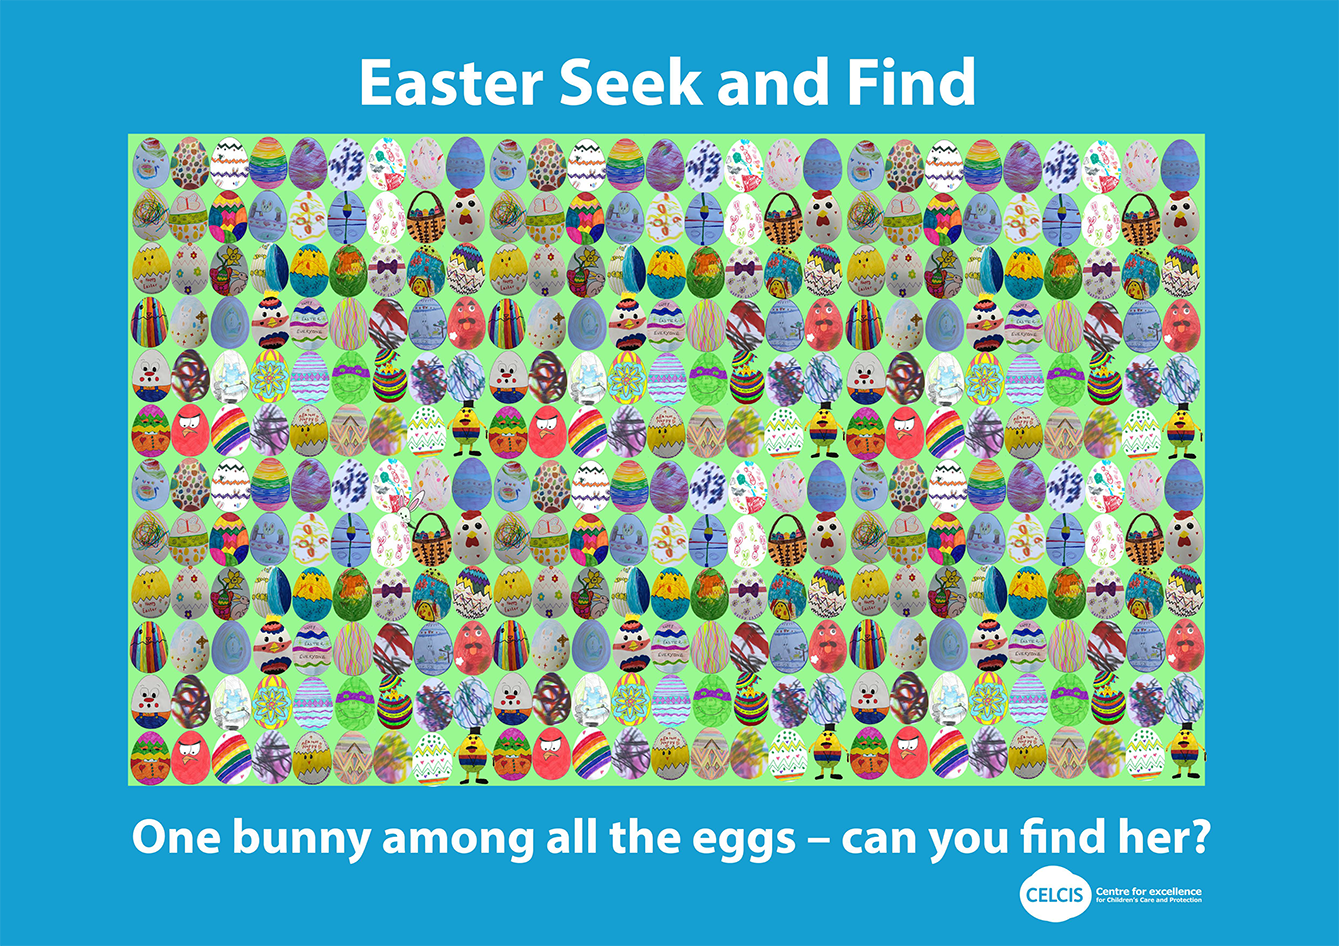 Can you find the Easter bunny?